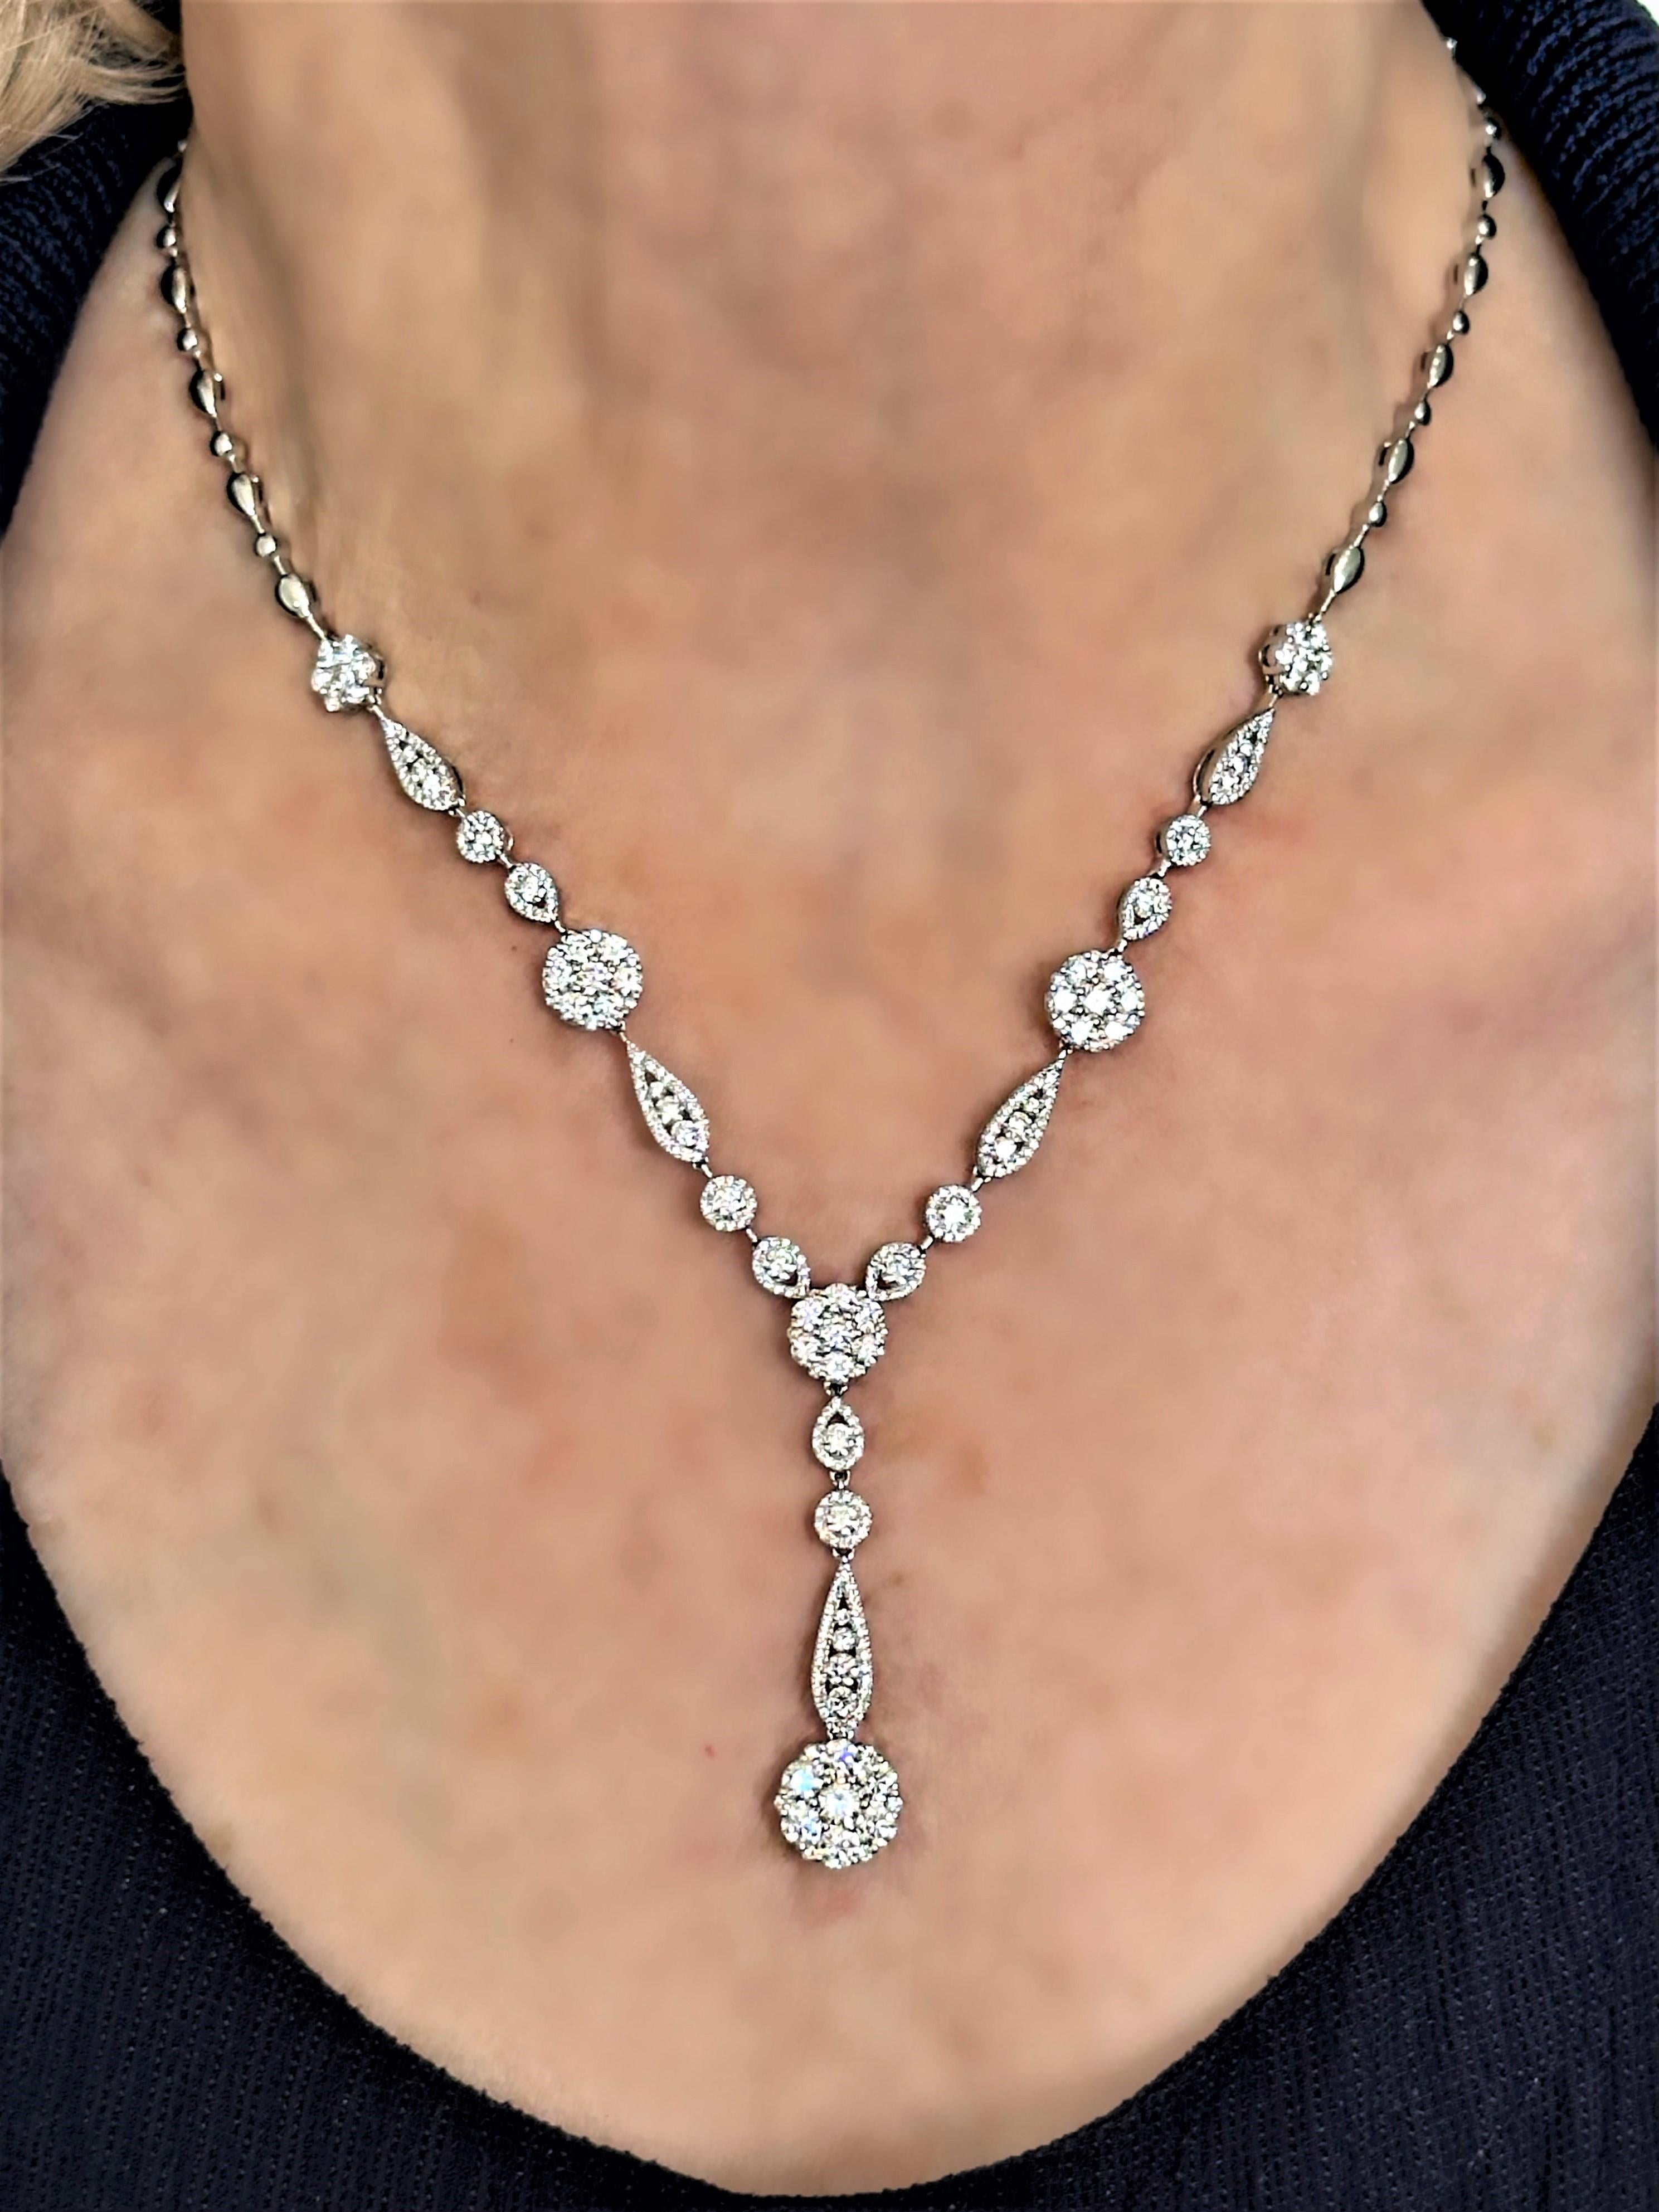 Scintillating Modern 18K White Gold Diamond Fashion Necklace with Drop For Sale 3